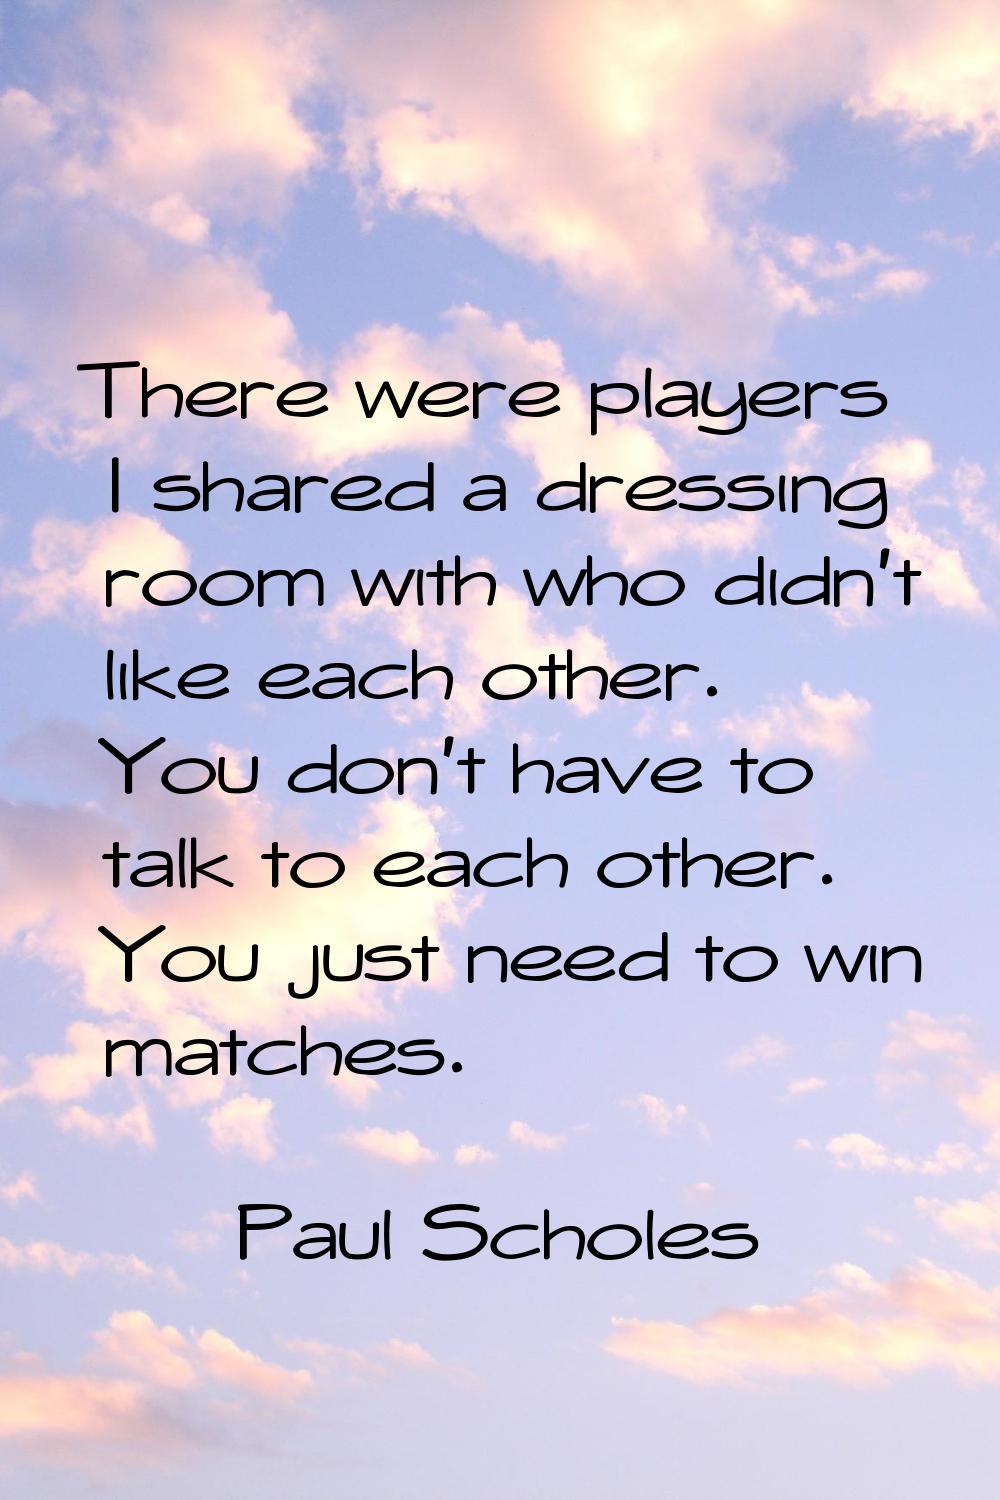 There were players I shared a dressing room with who didn't like each other. You don't have to talk